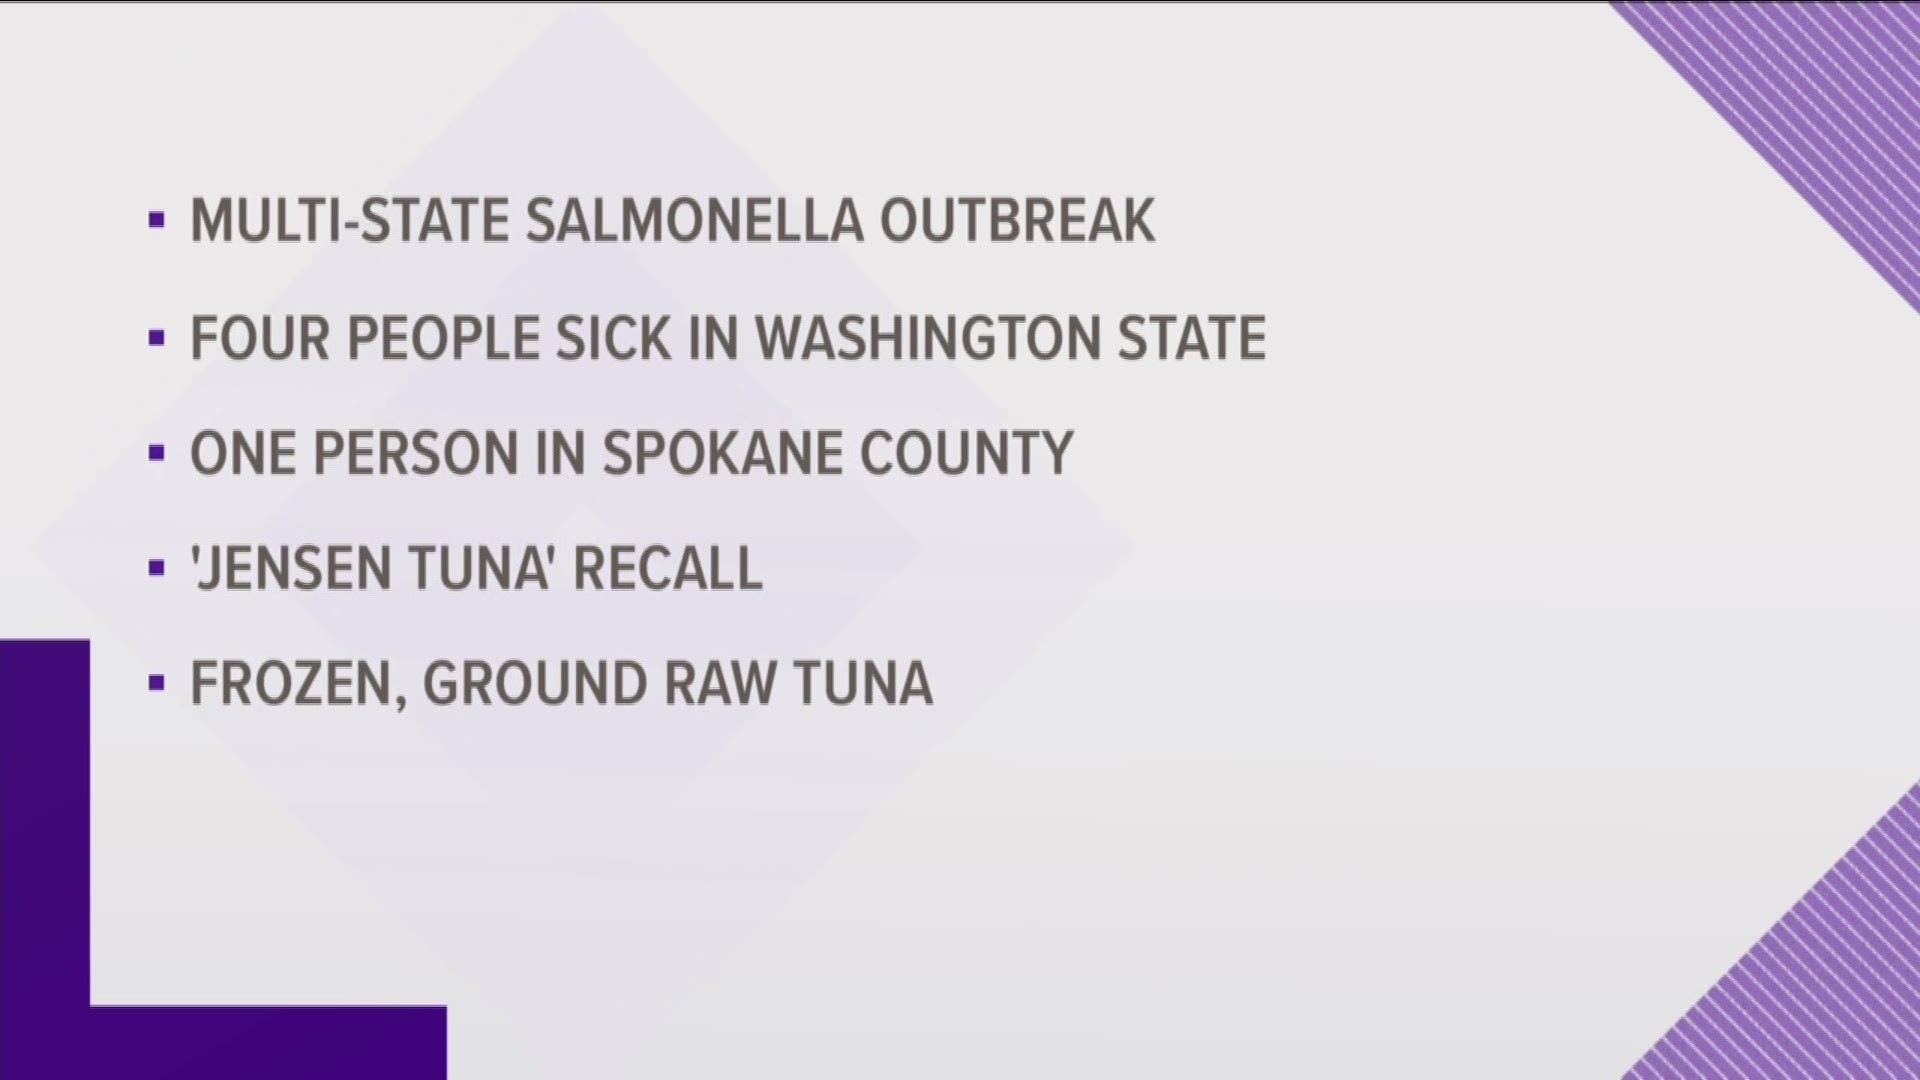 Four Washington residents, including one in Spokane County, came down with Salmonella in the outbreak that has affected seven states.